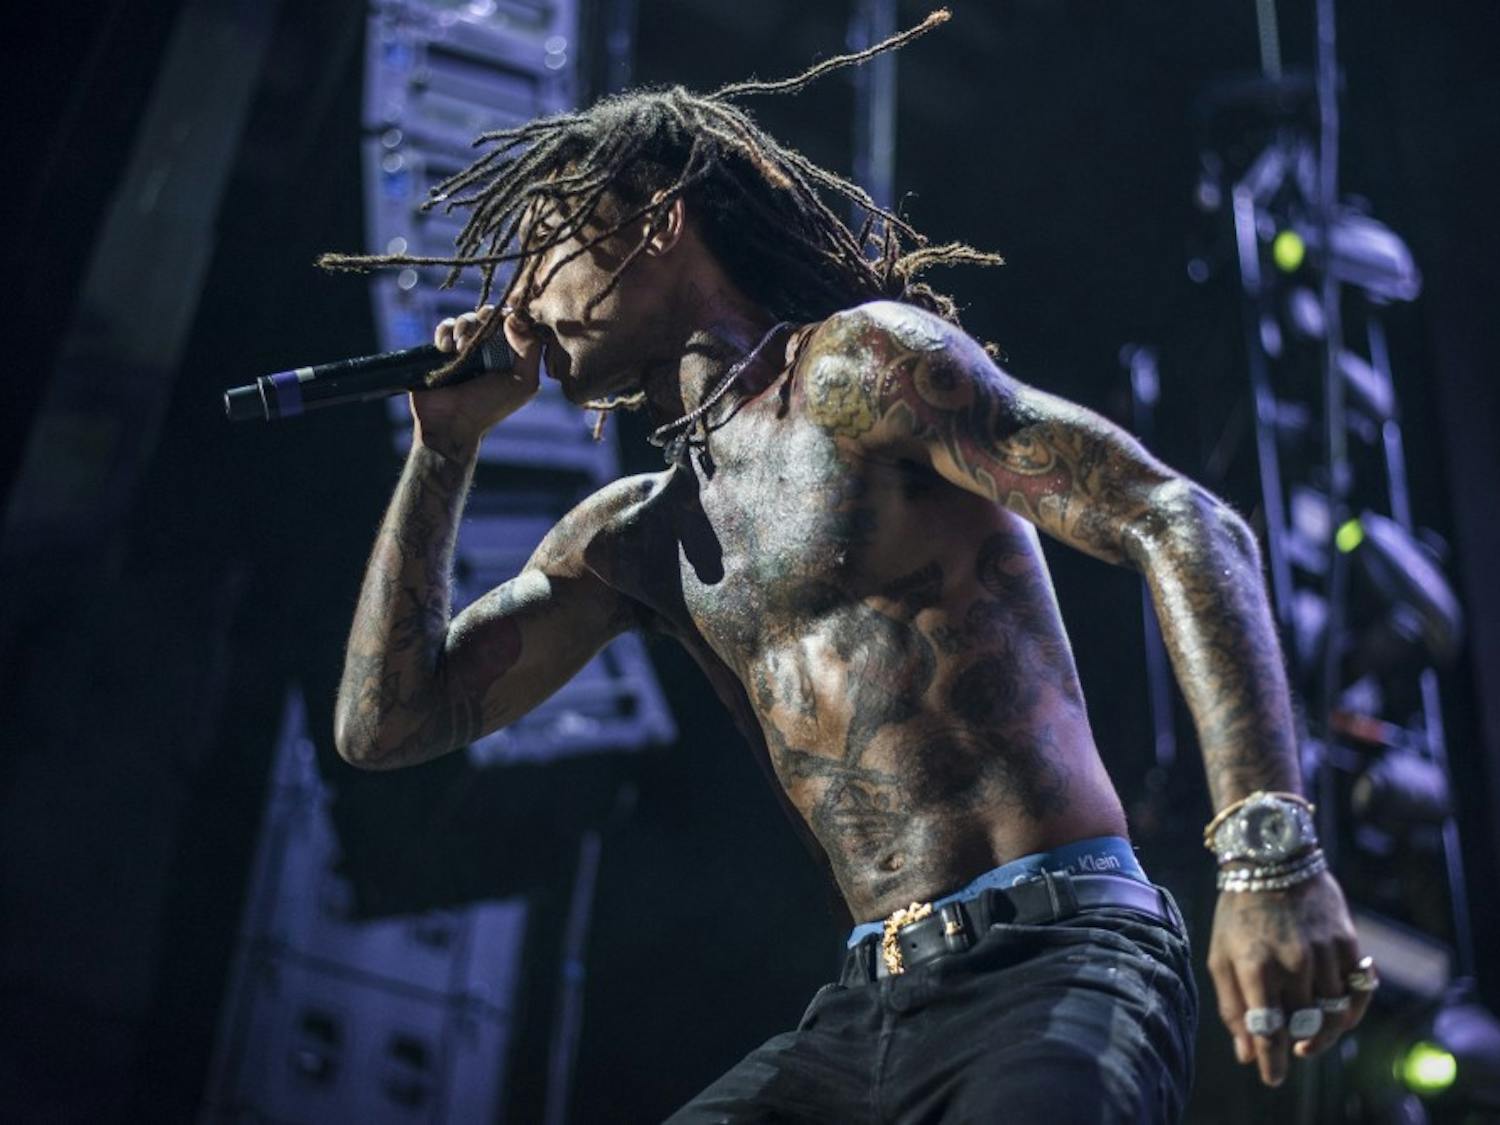 Swae Lee, one brother of the rap duo Rae Sremmurd, co-headline with Wiz Khalifa on the "Dazed and Blazed Tour" performed on Wednesday Aug. 29, 2018.&nbsp;